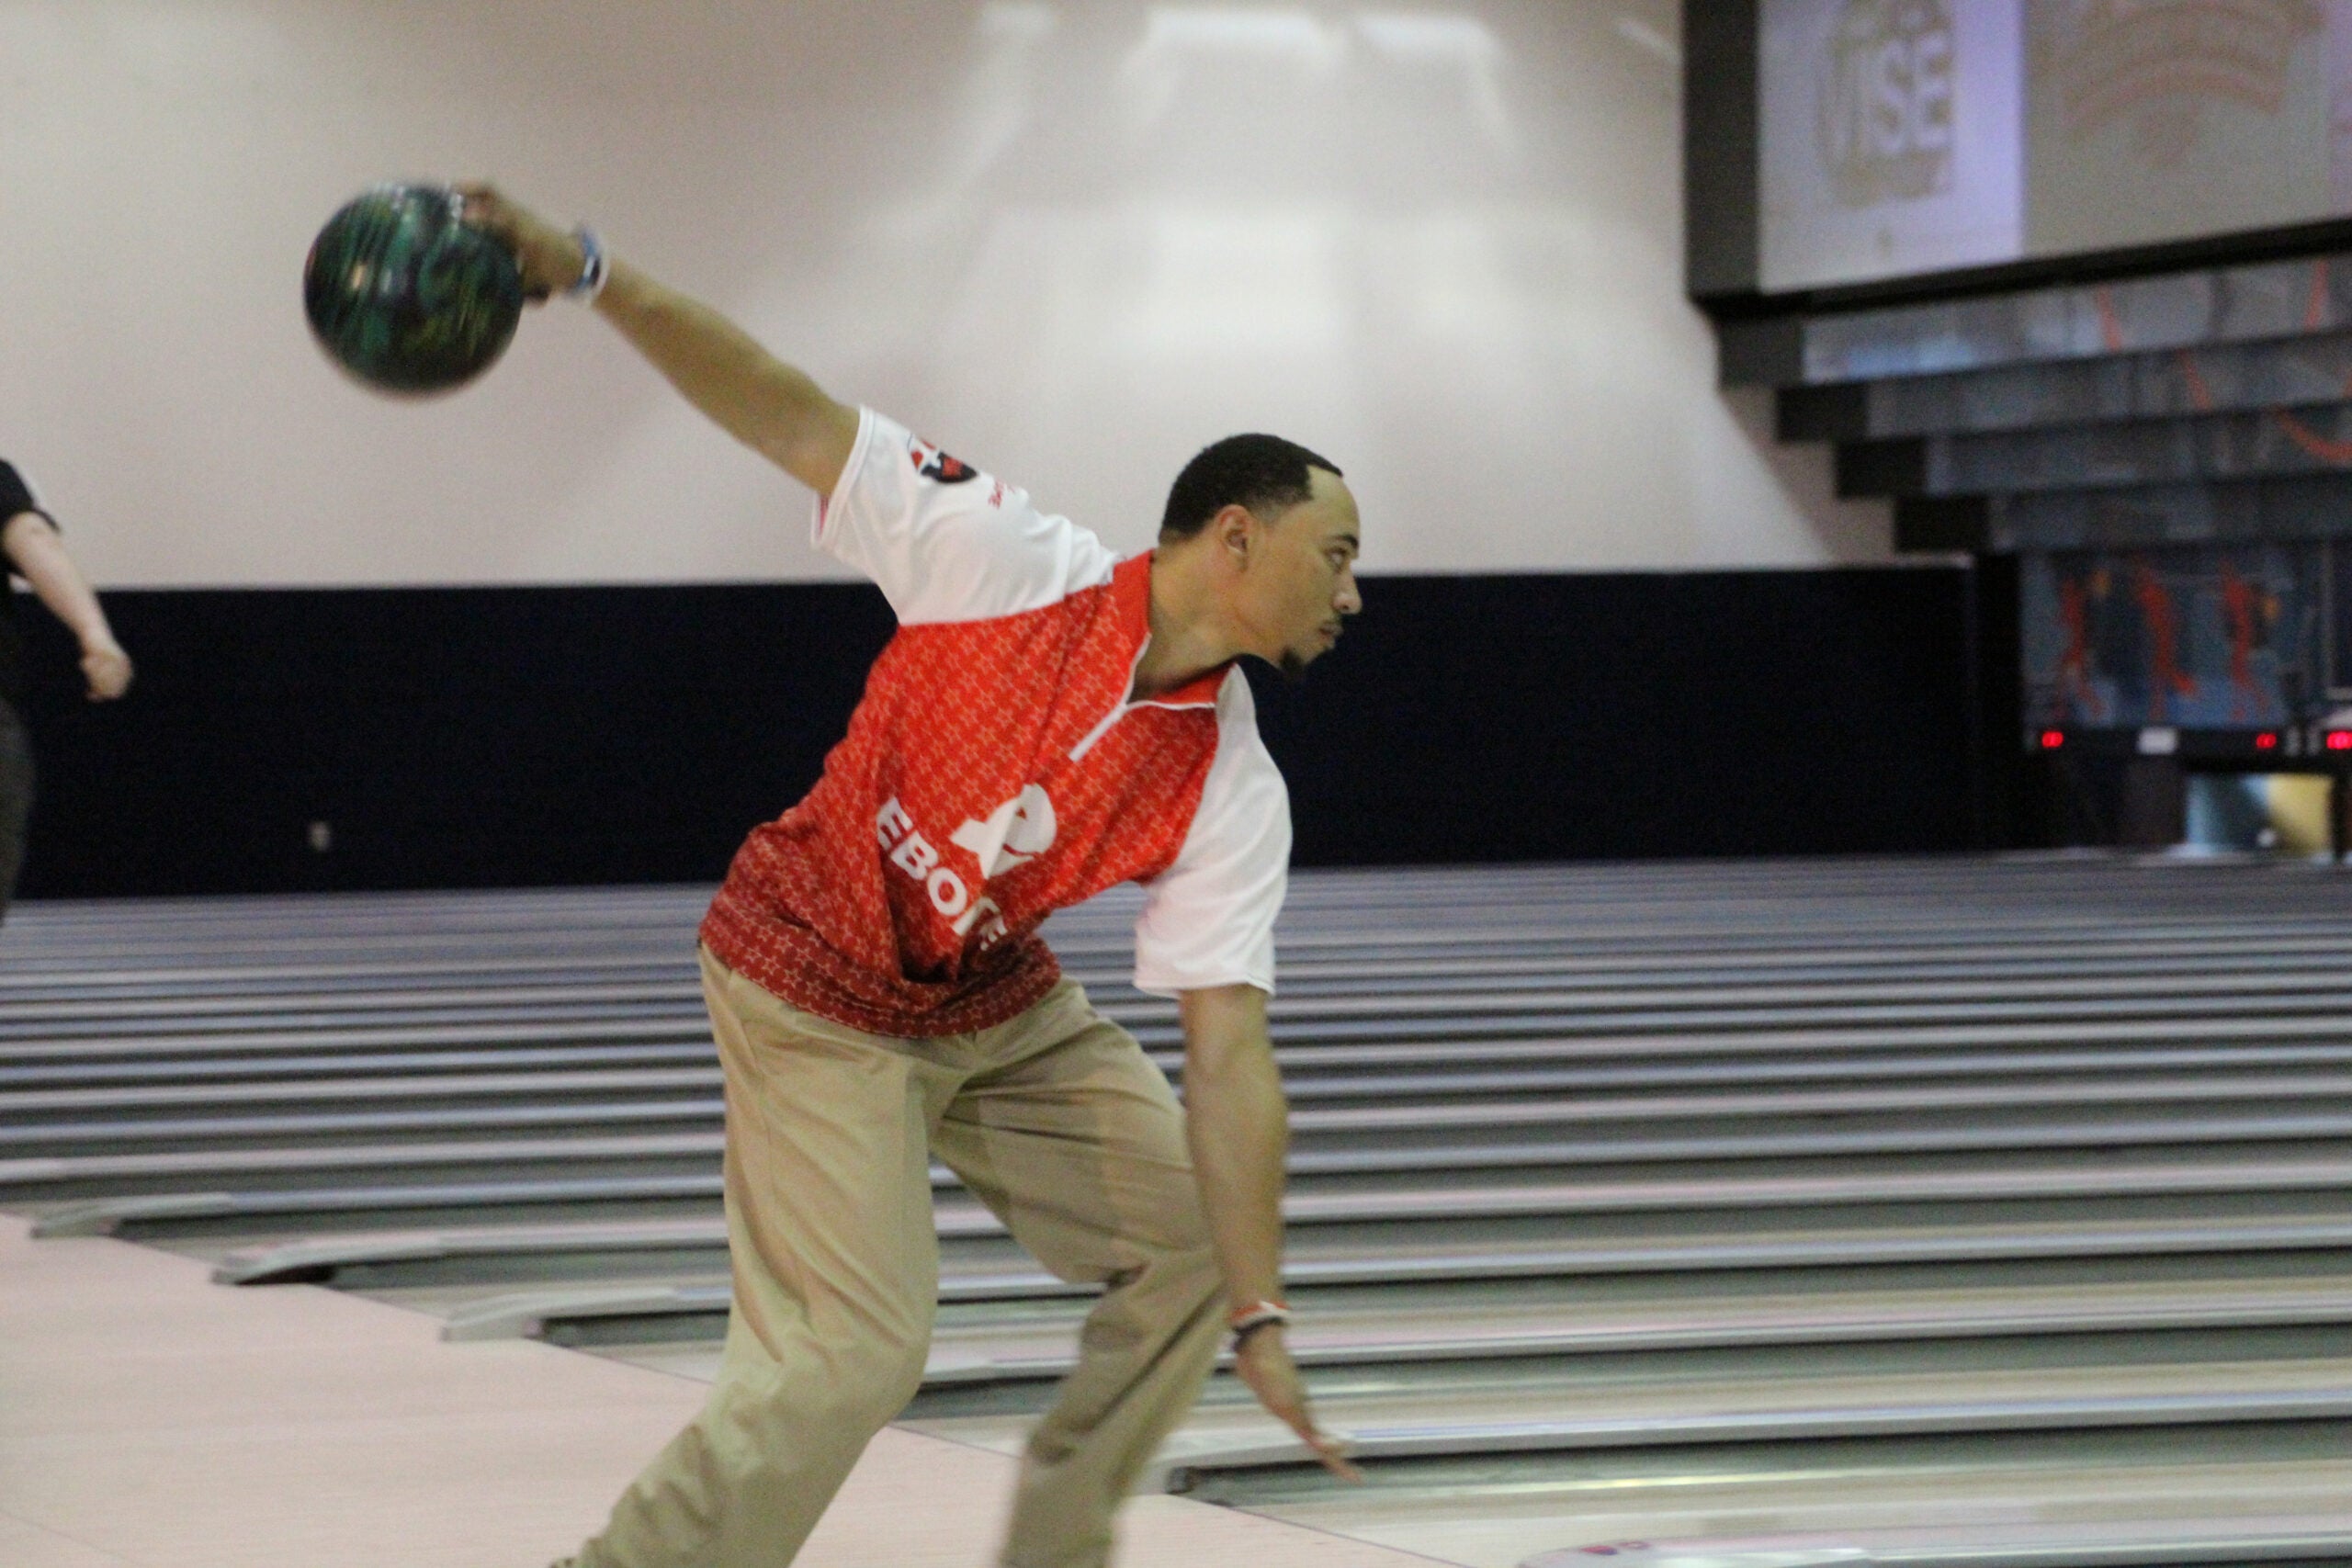 Mookie Betts rolled a perfect game at the World Series of Bowling